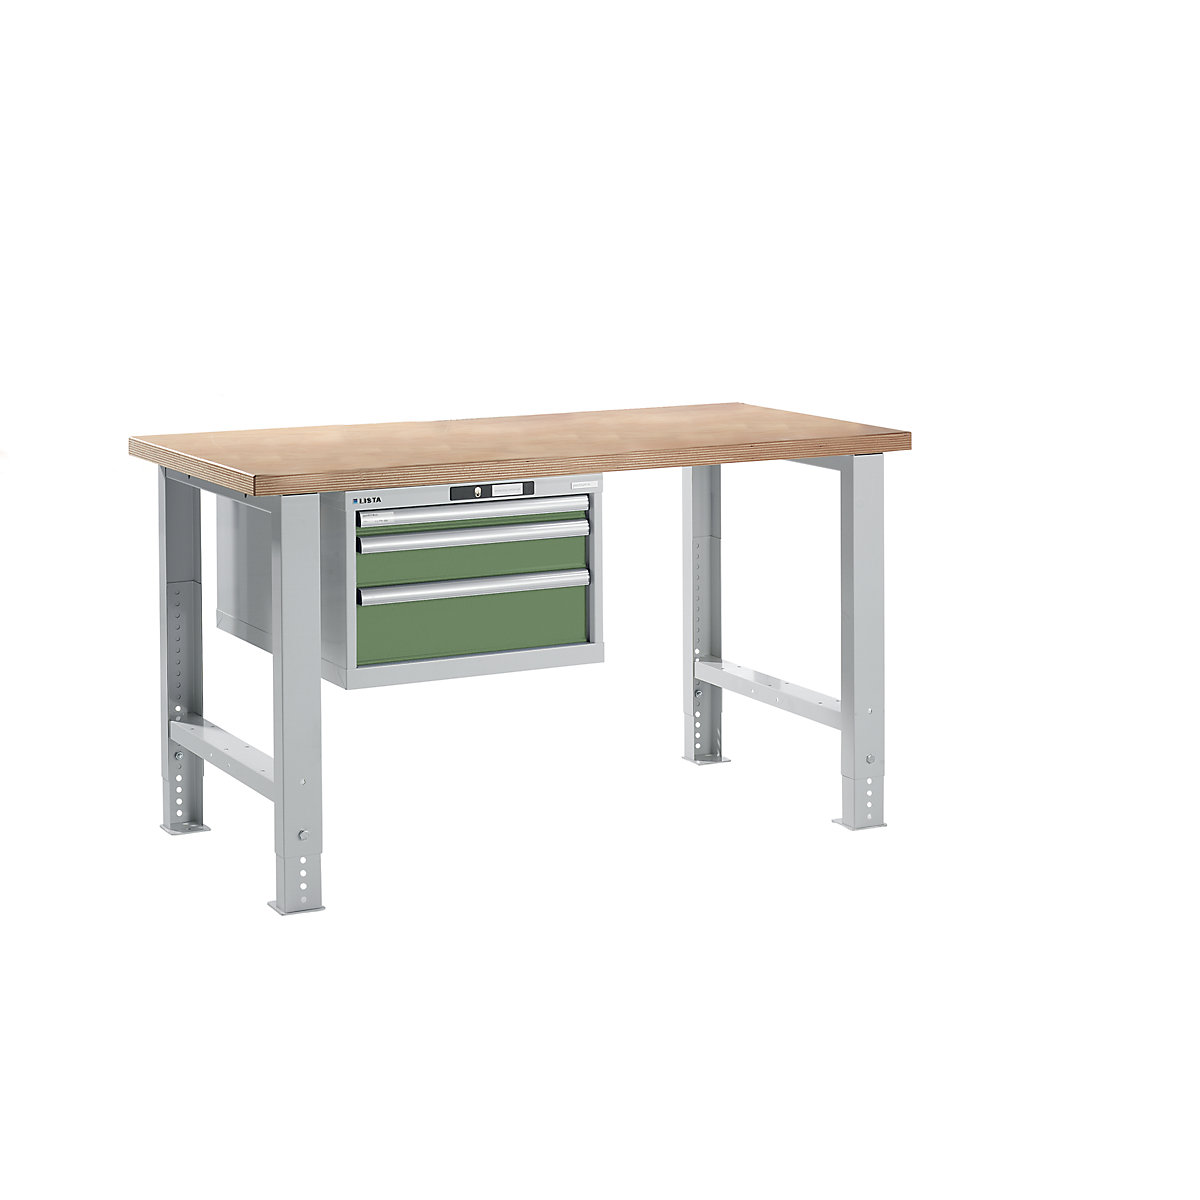 Modular workbench – LISTA, height 740 – 1090 mm, suspended drawer unit, 3 drawers, reseda green, table width 1500 mm-5